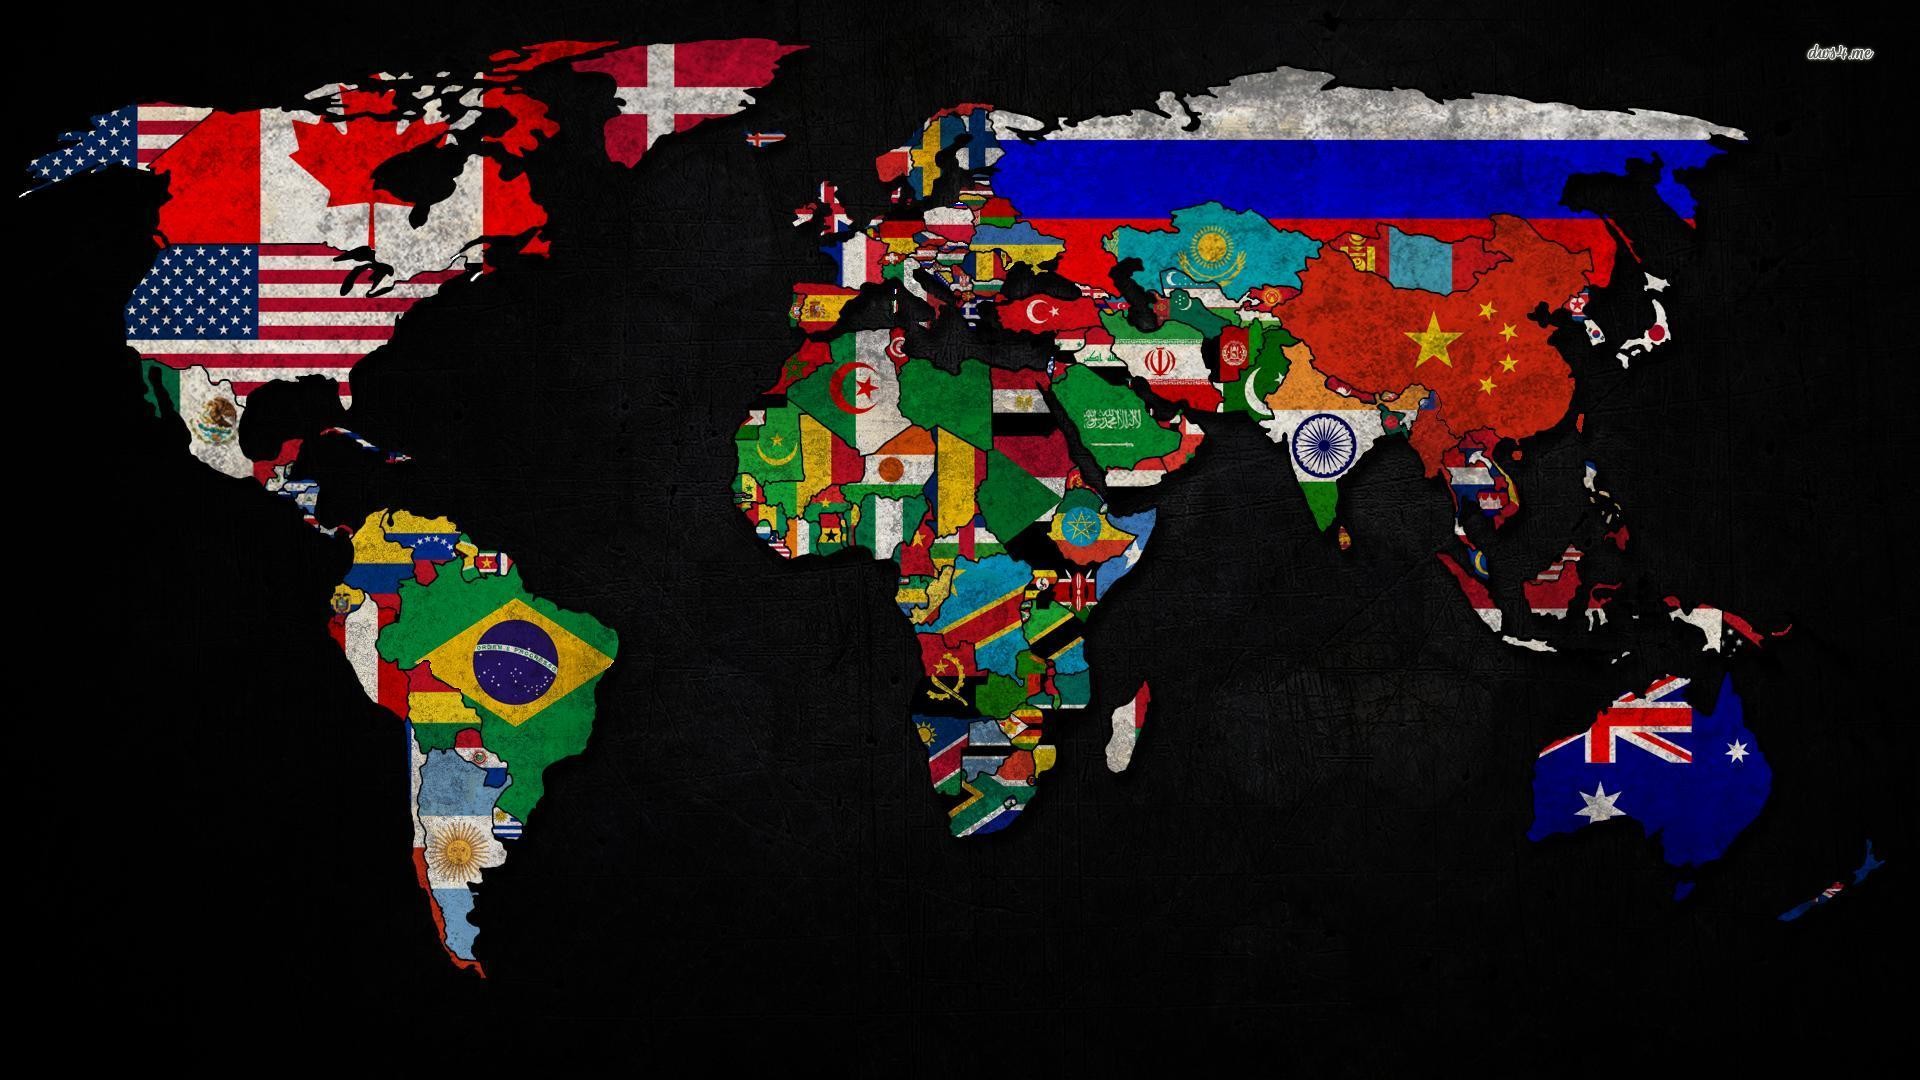 1920x1080 World map and flags wallpaper 1280x800 World map and flags wallpaper .